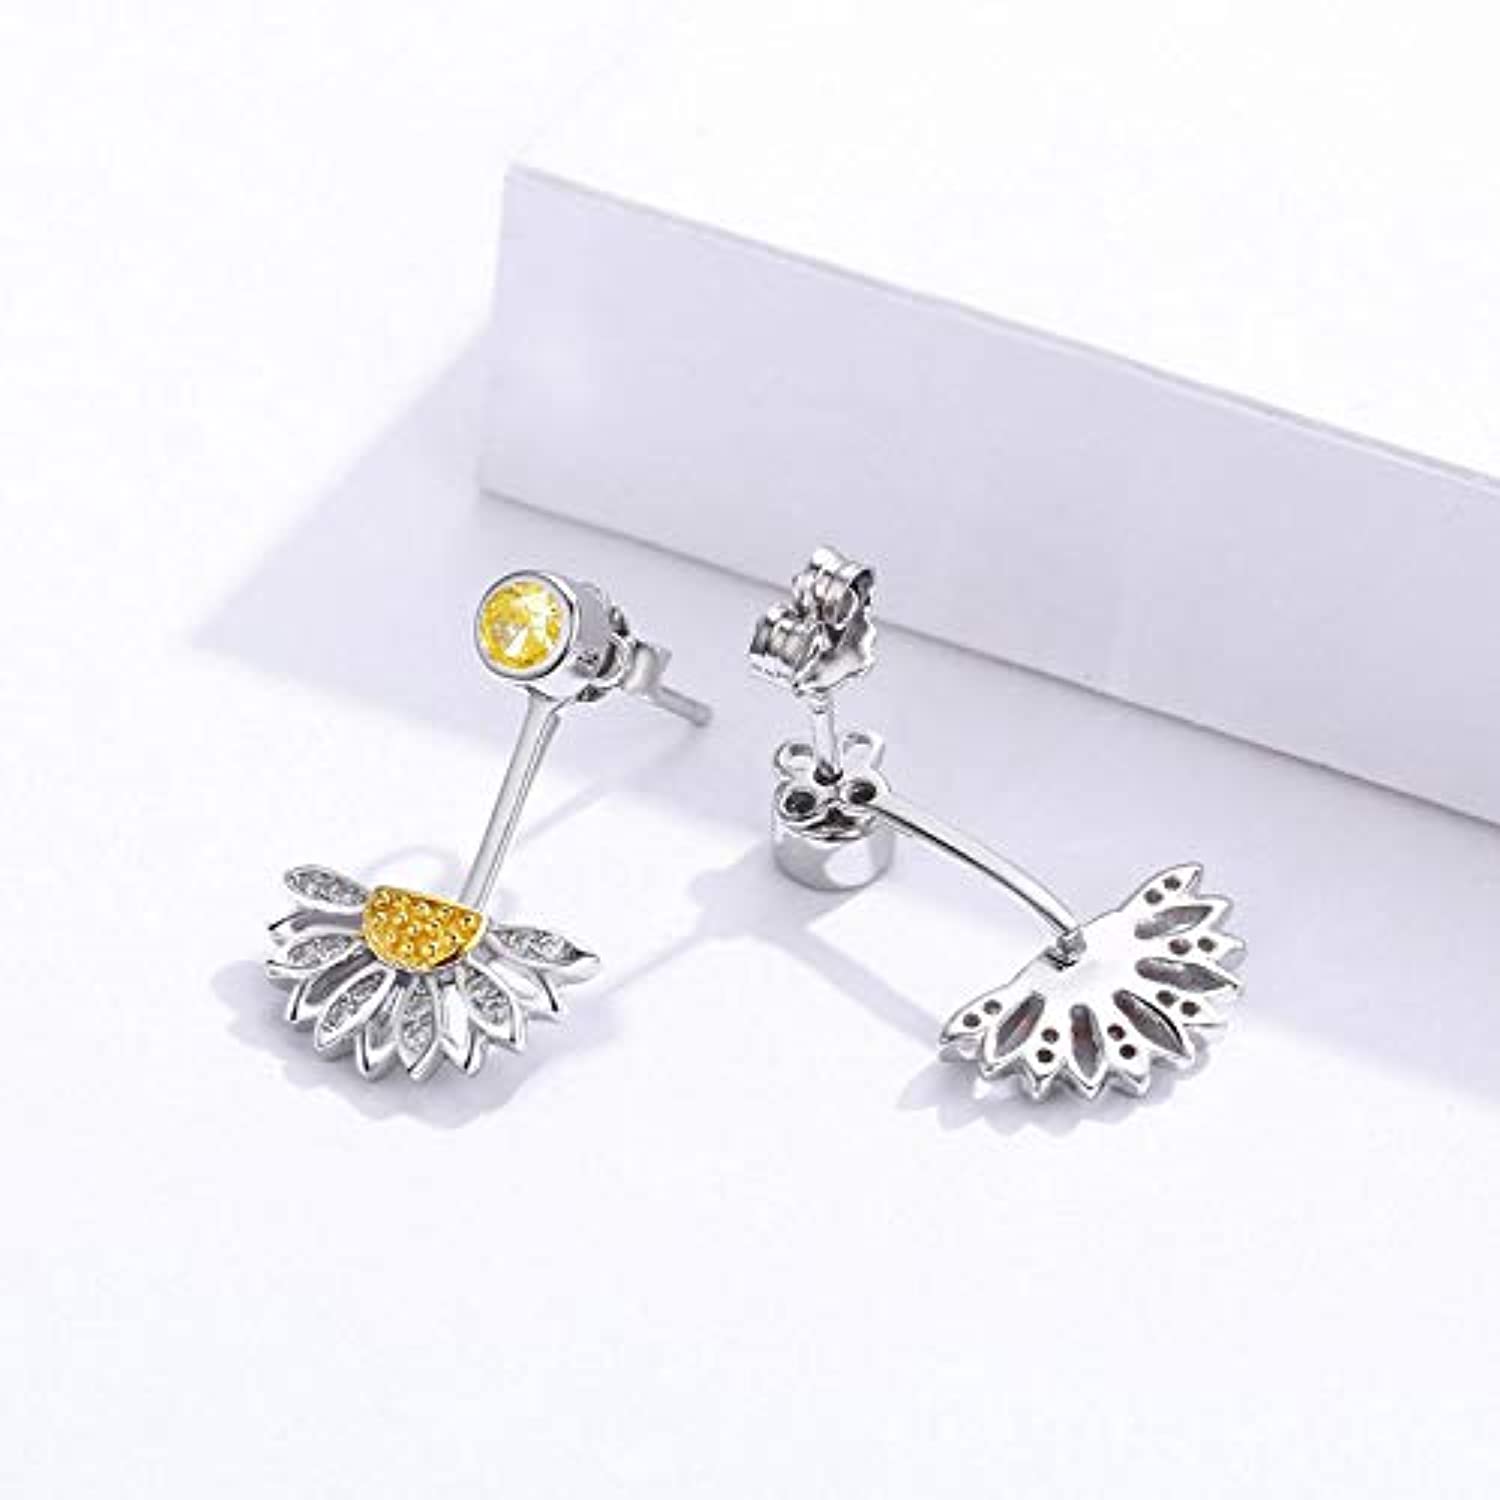 S925  Sterling silver Sunflower Stud  Earring Jewelry Gift for Her Women